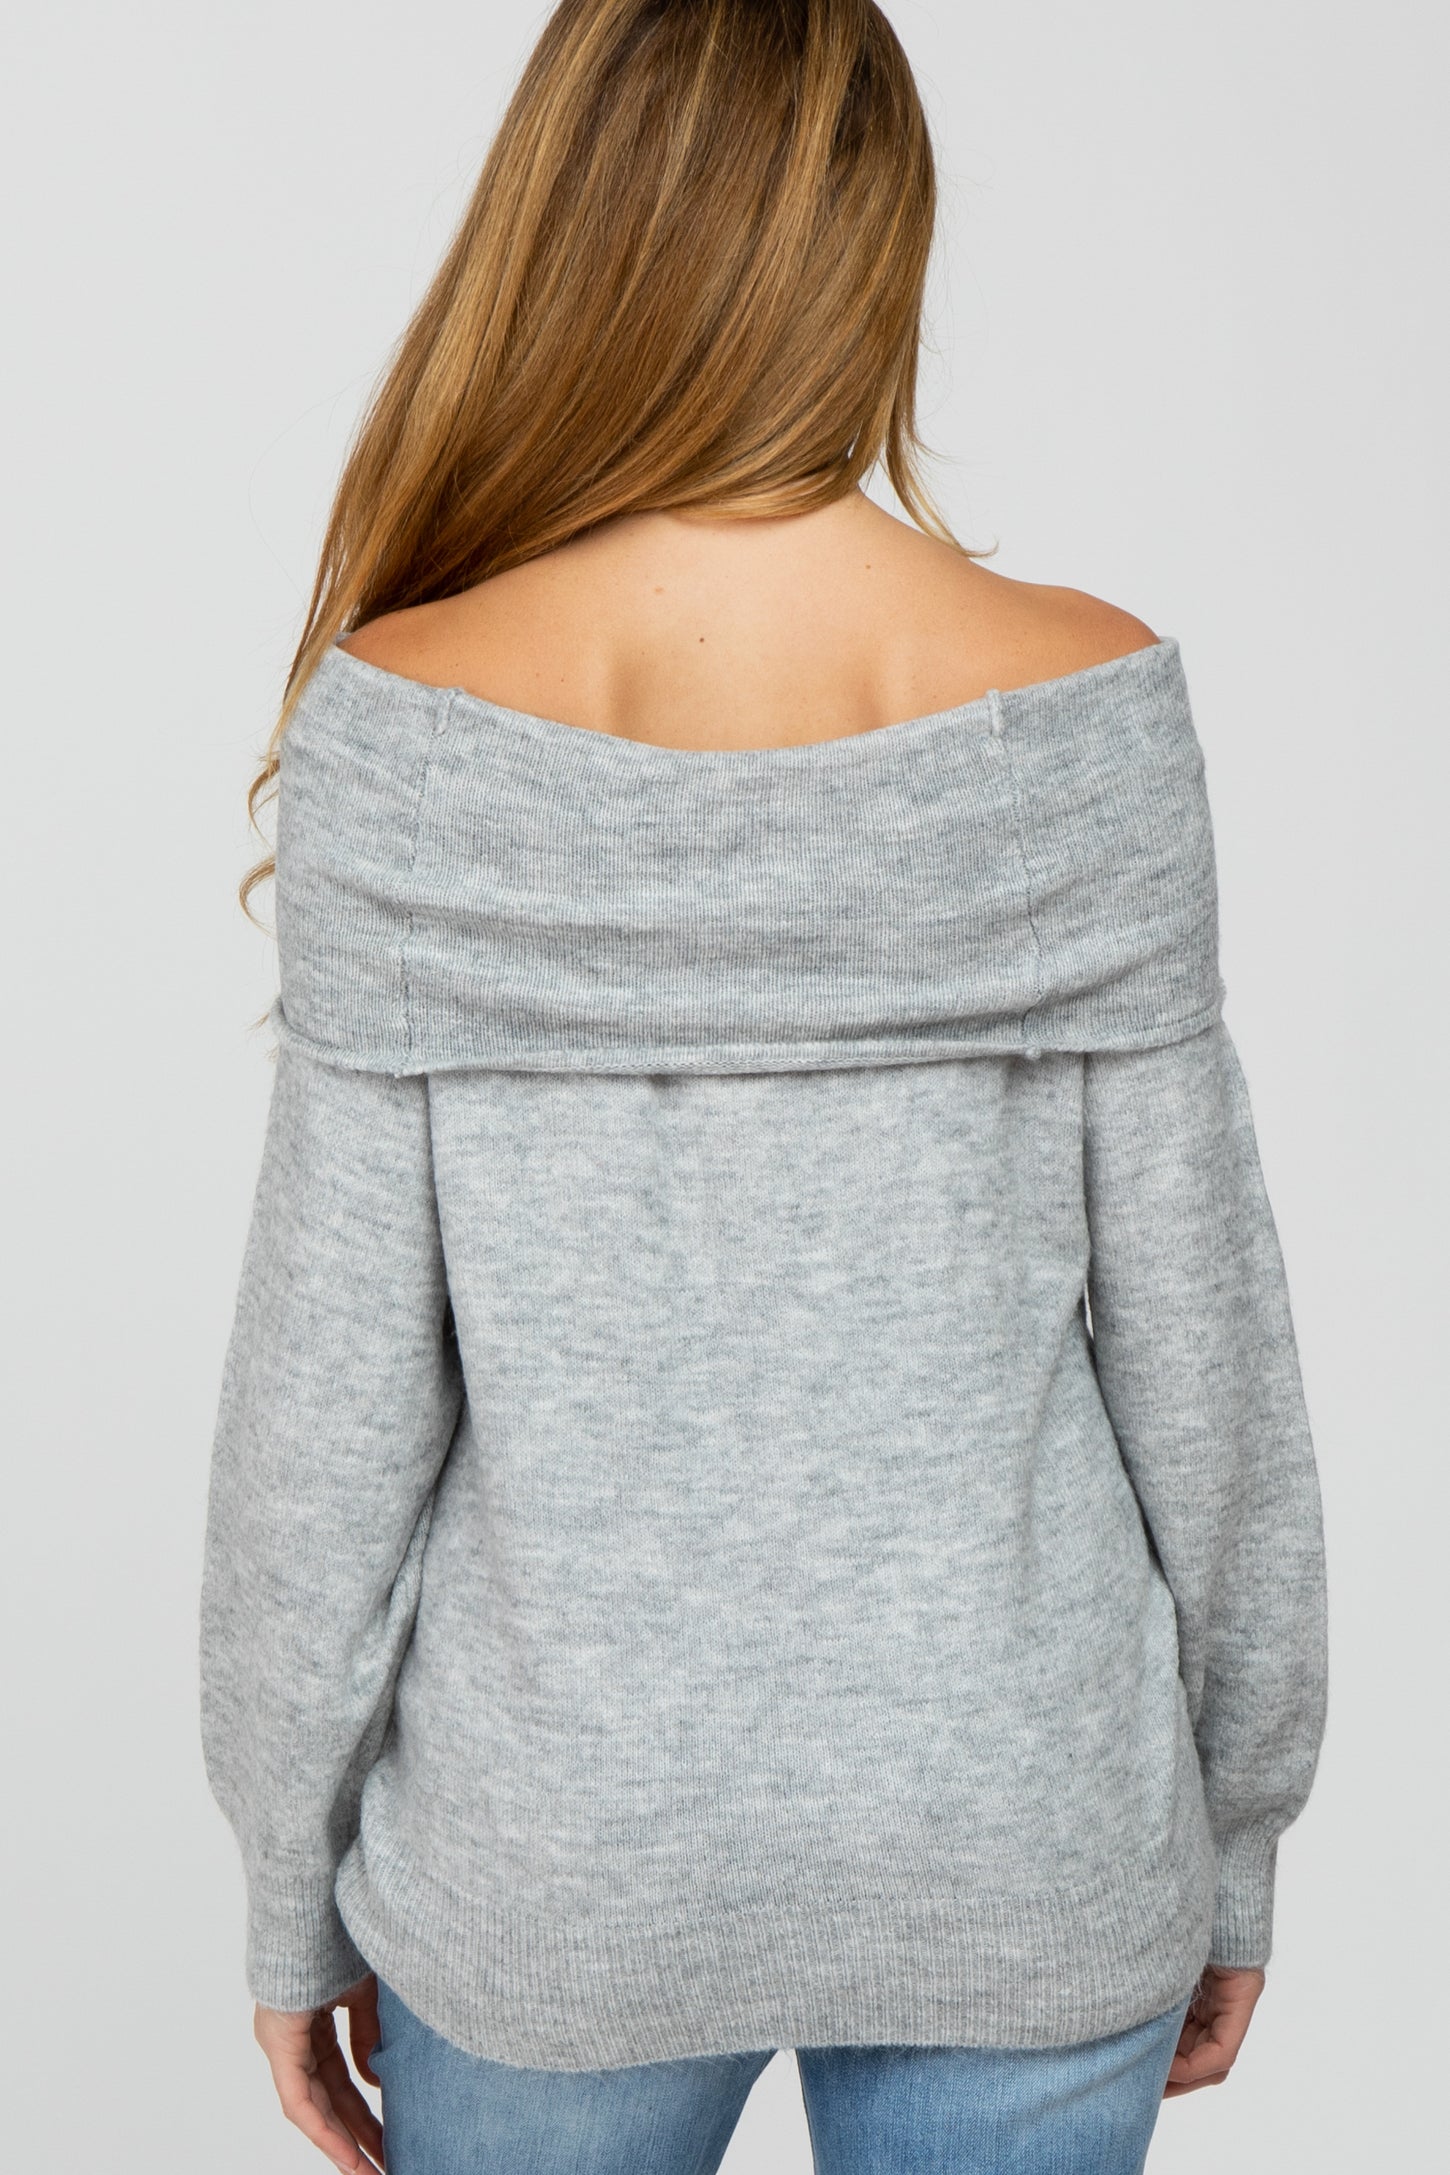 Heather Grey Off Shoulder Foldover Maternity Sweater